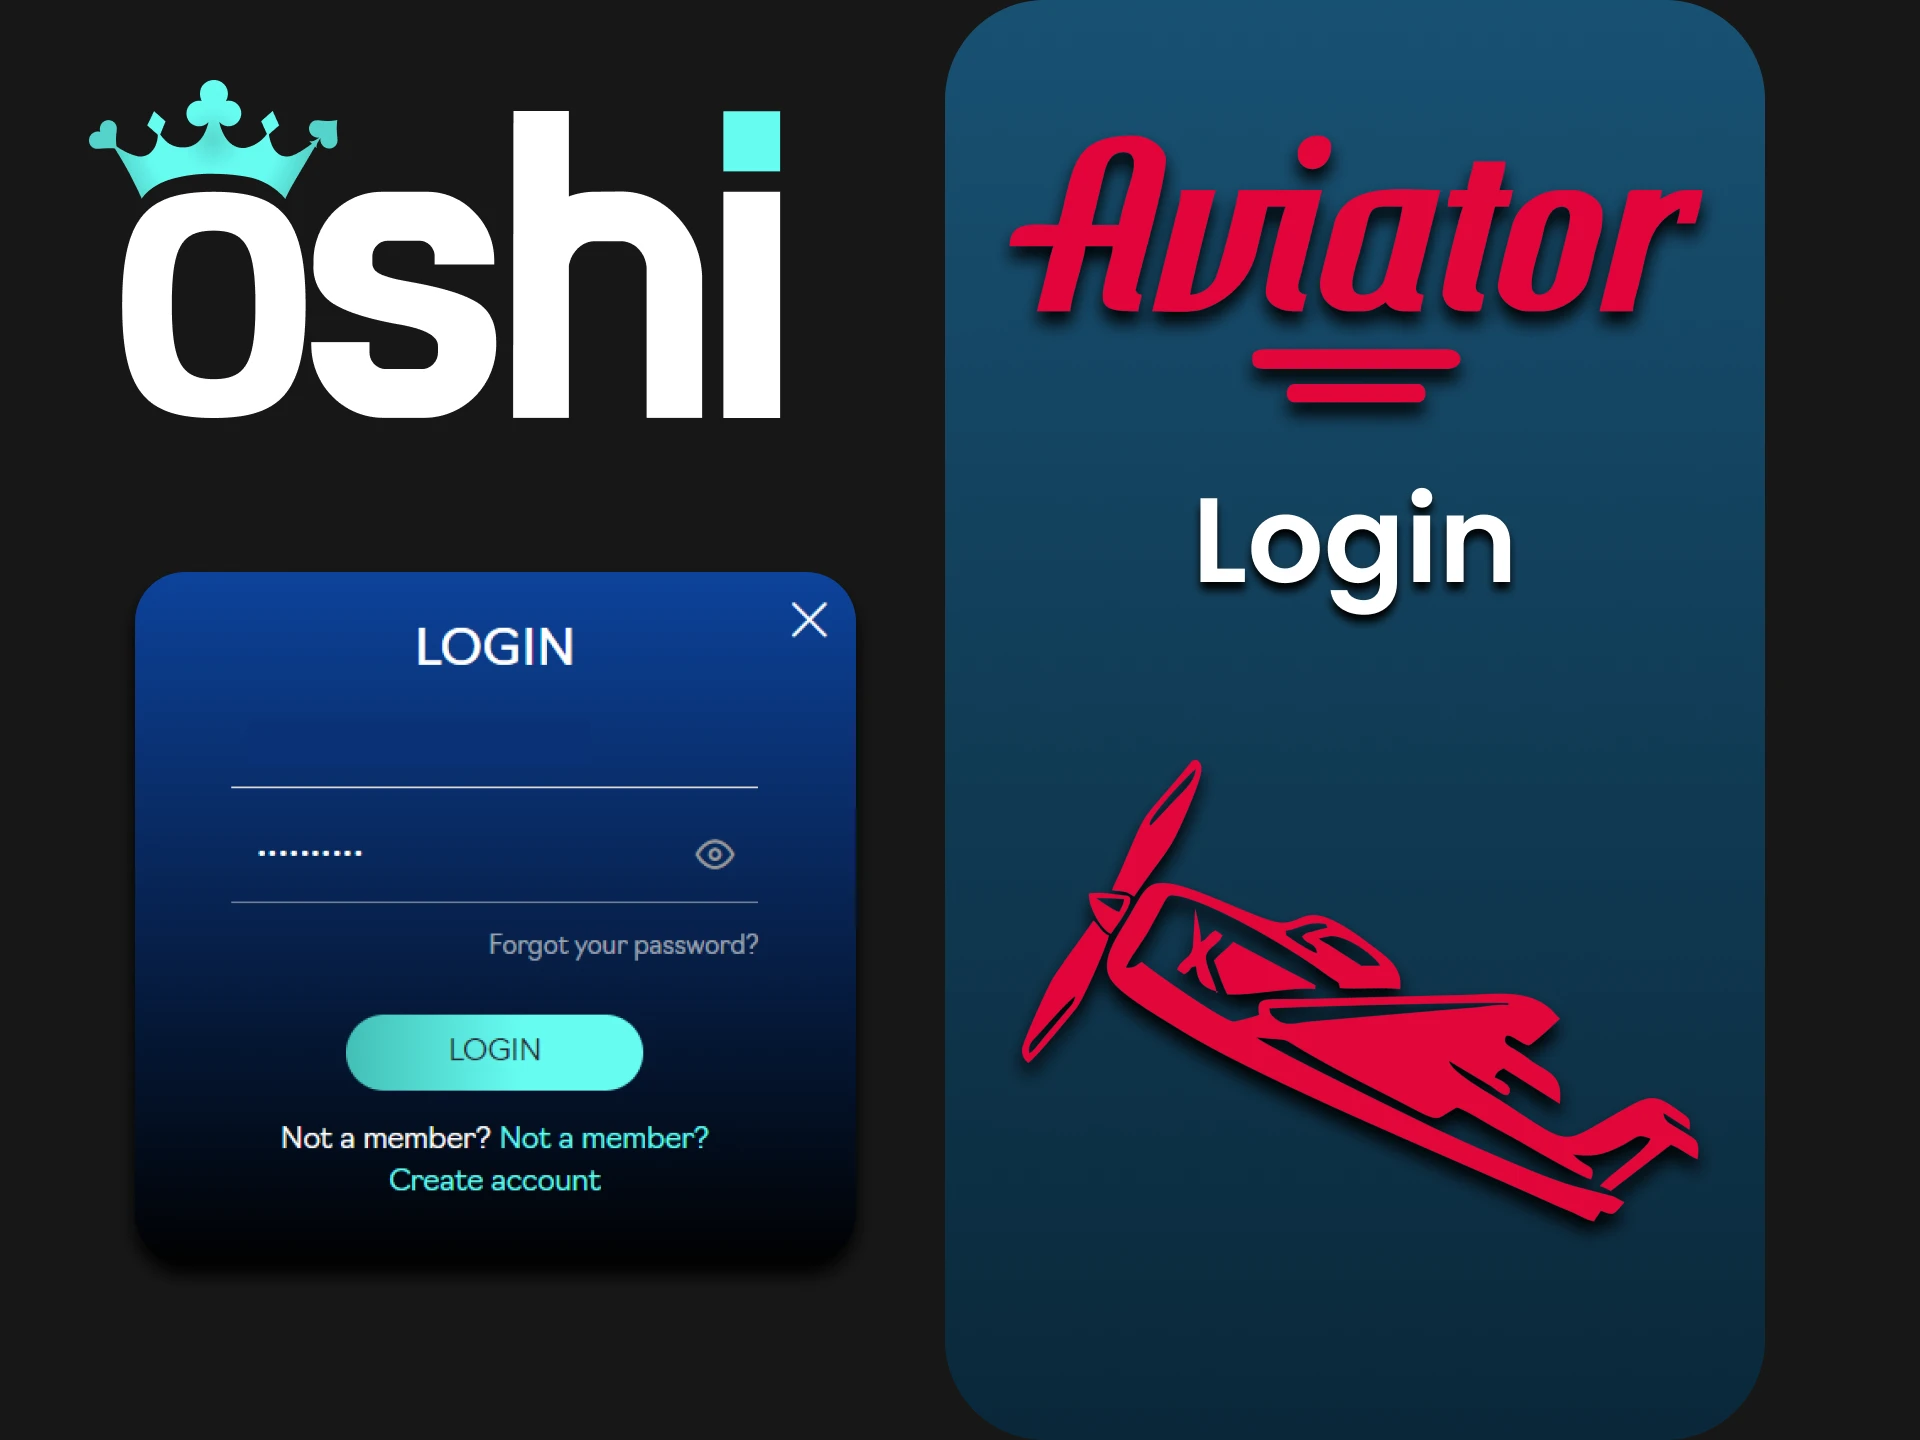 Log in to your personal account at Oshi Casino to play Aviator.